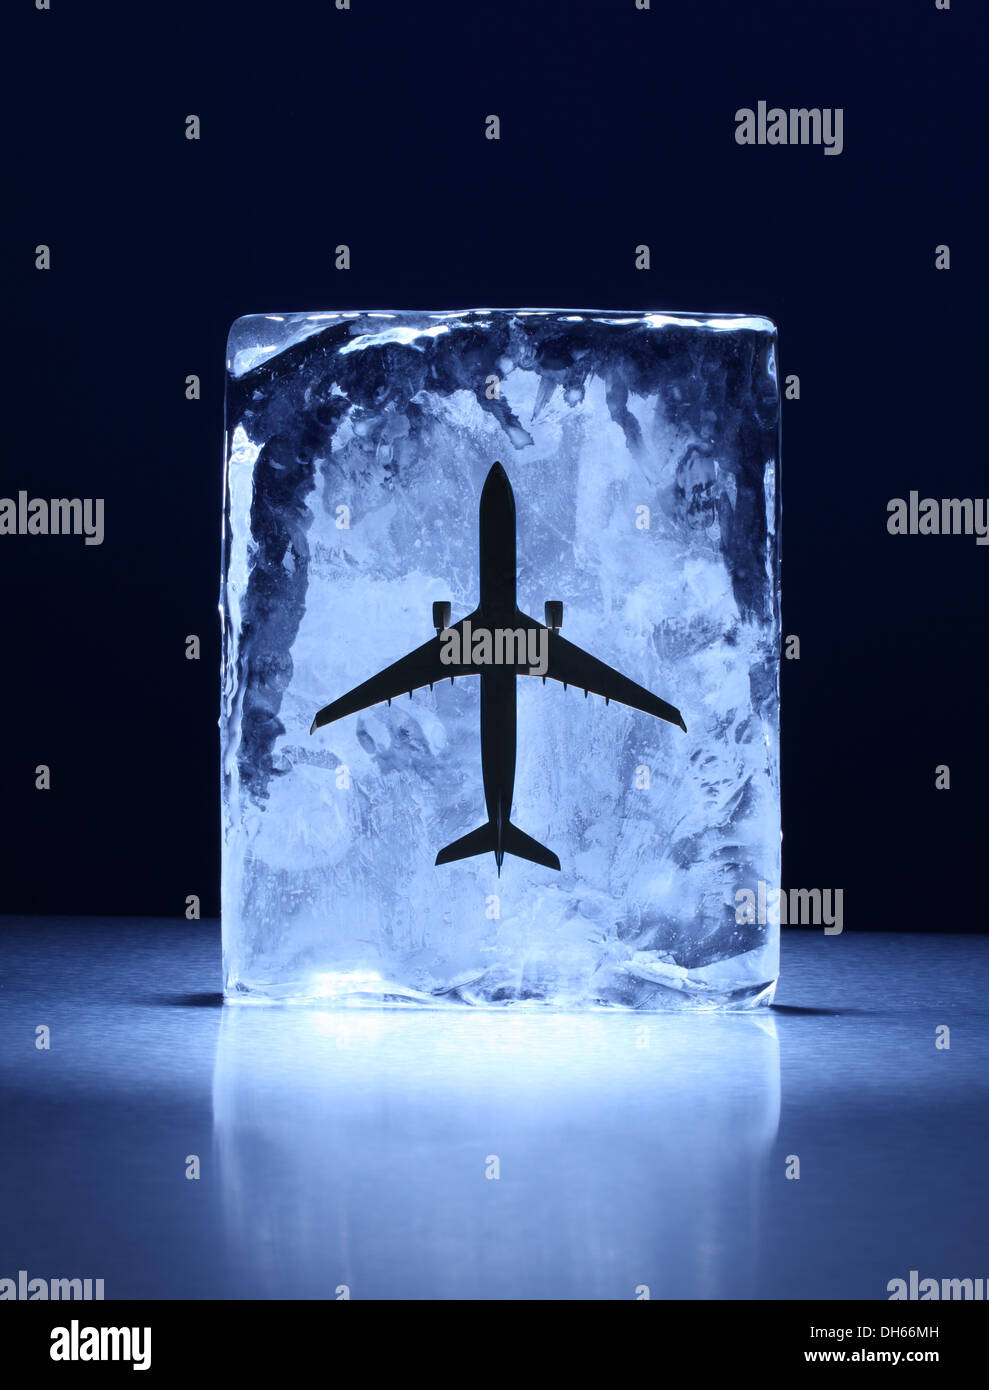 A model airplane frozen in a clear block of ice Stock Photo